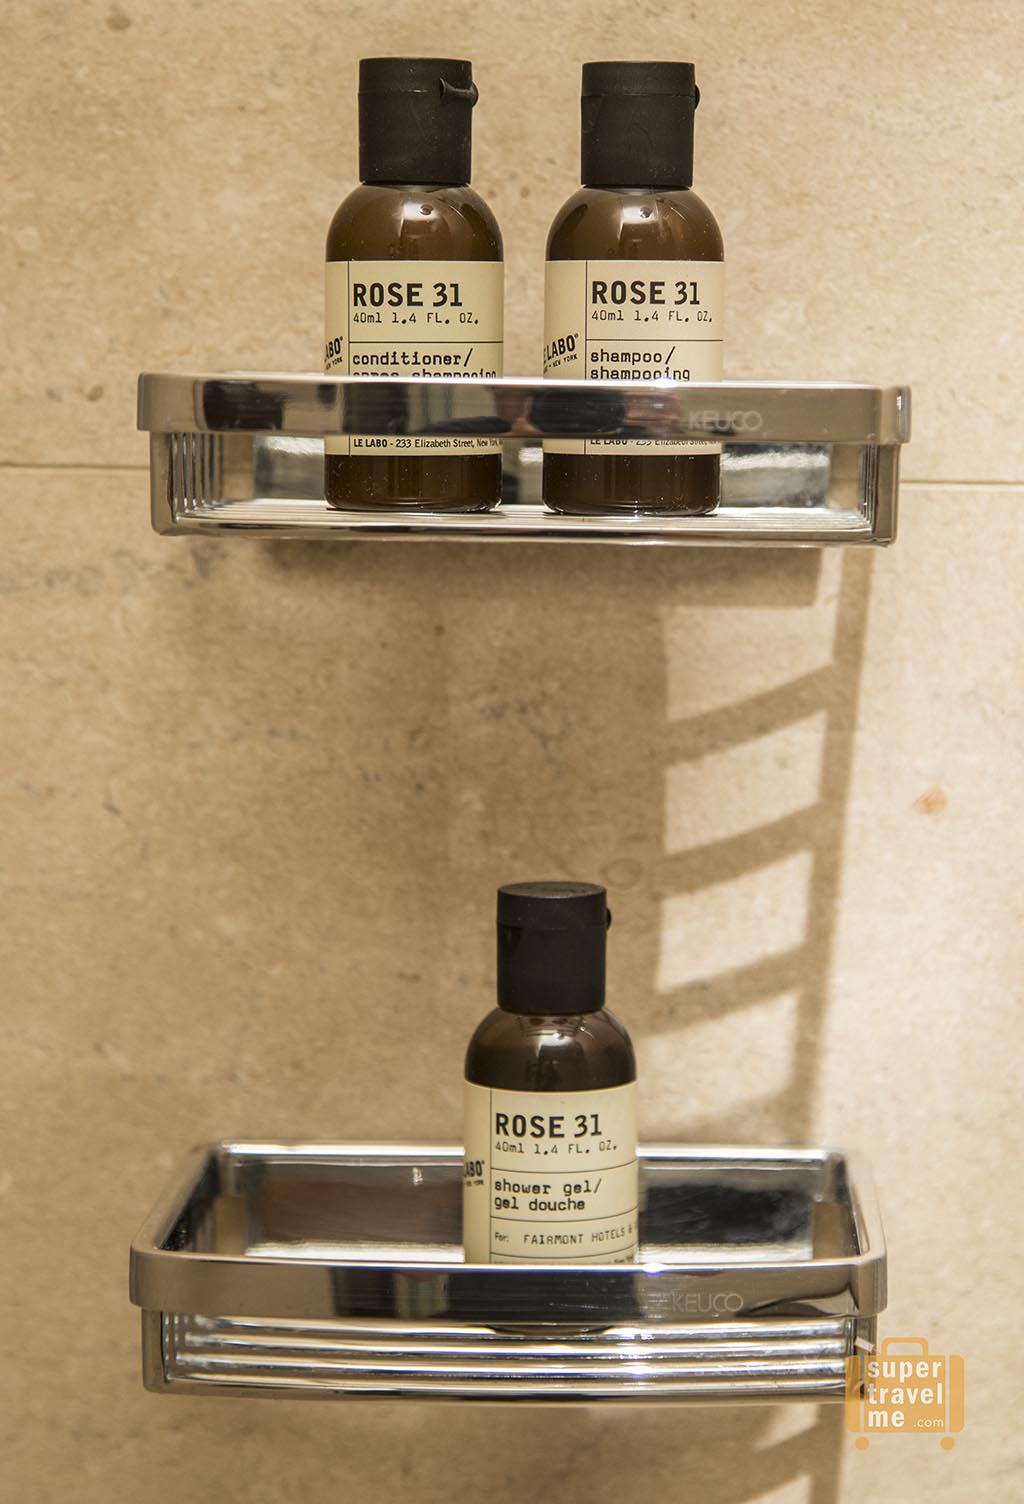 My favourite Le Labo Rose 31 scented amenities - a standard of Fairmont Hotels around the world